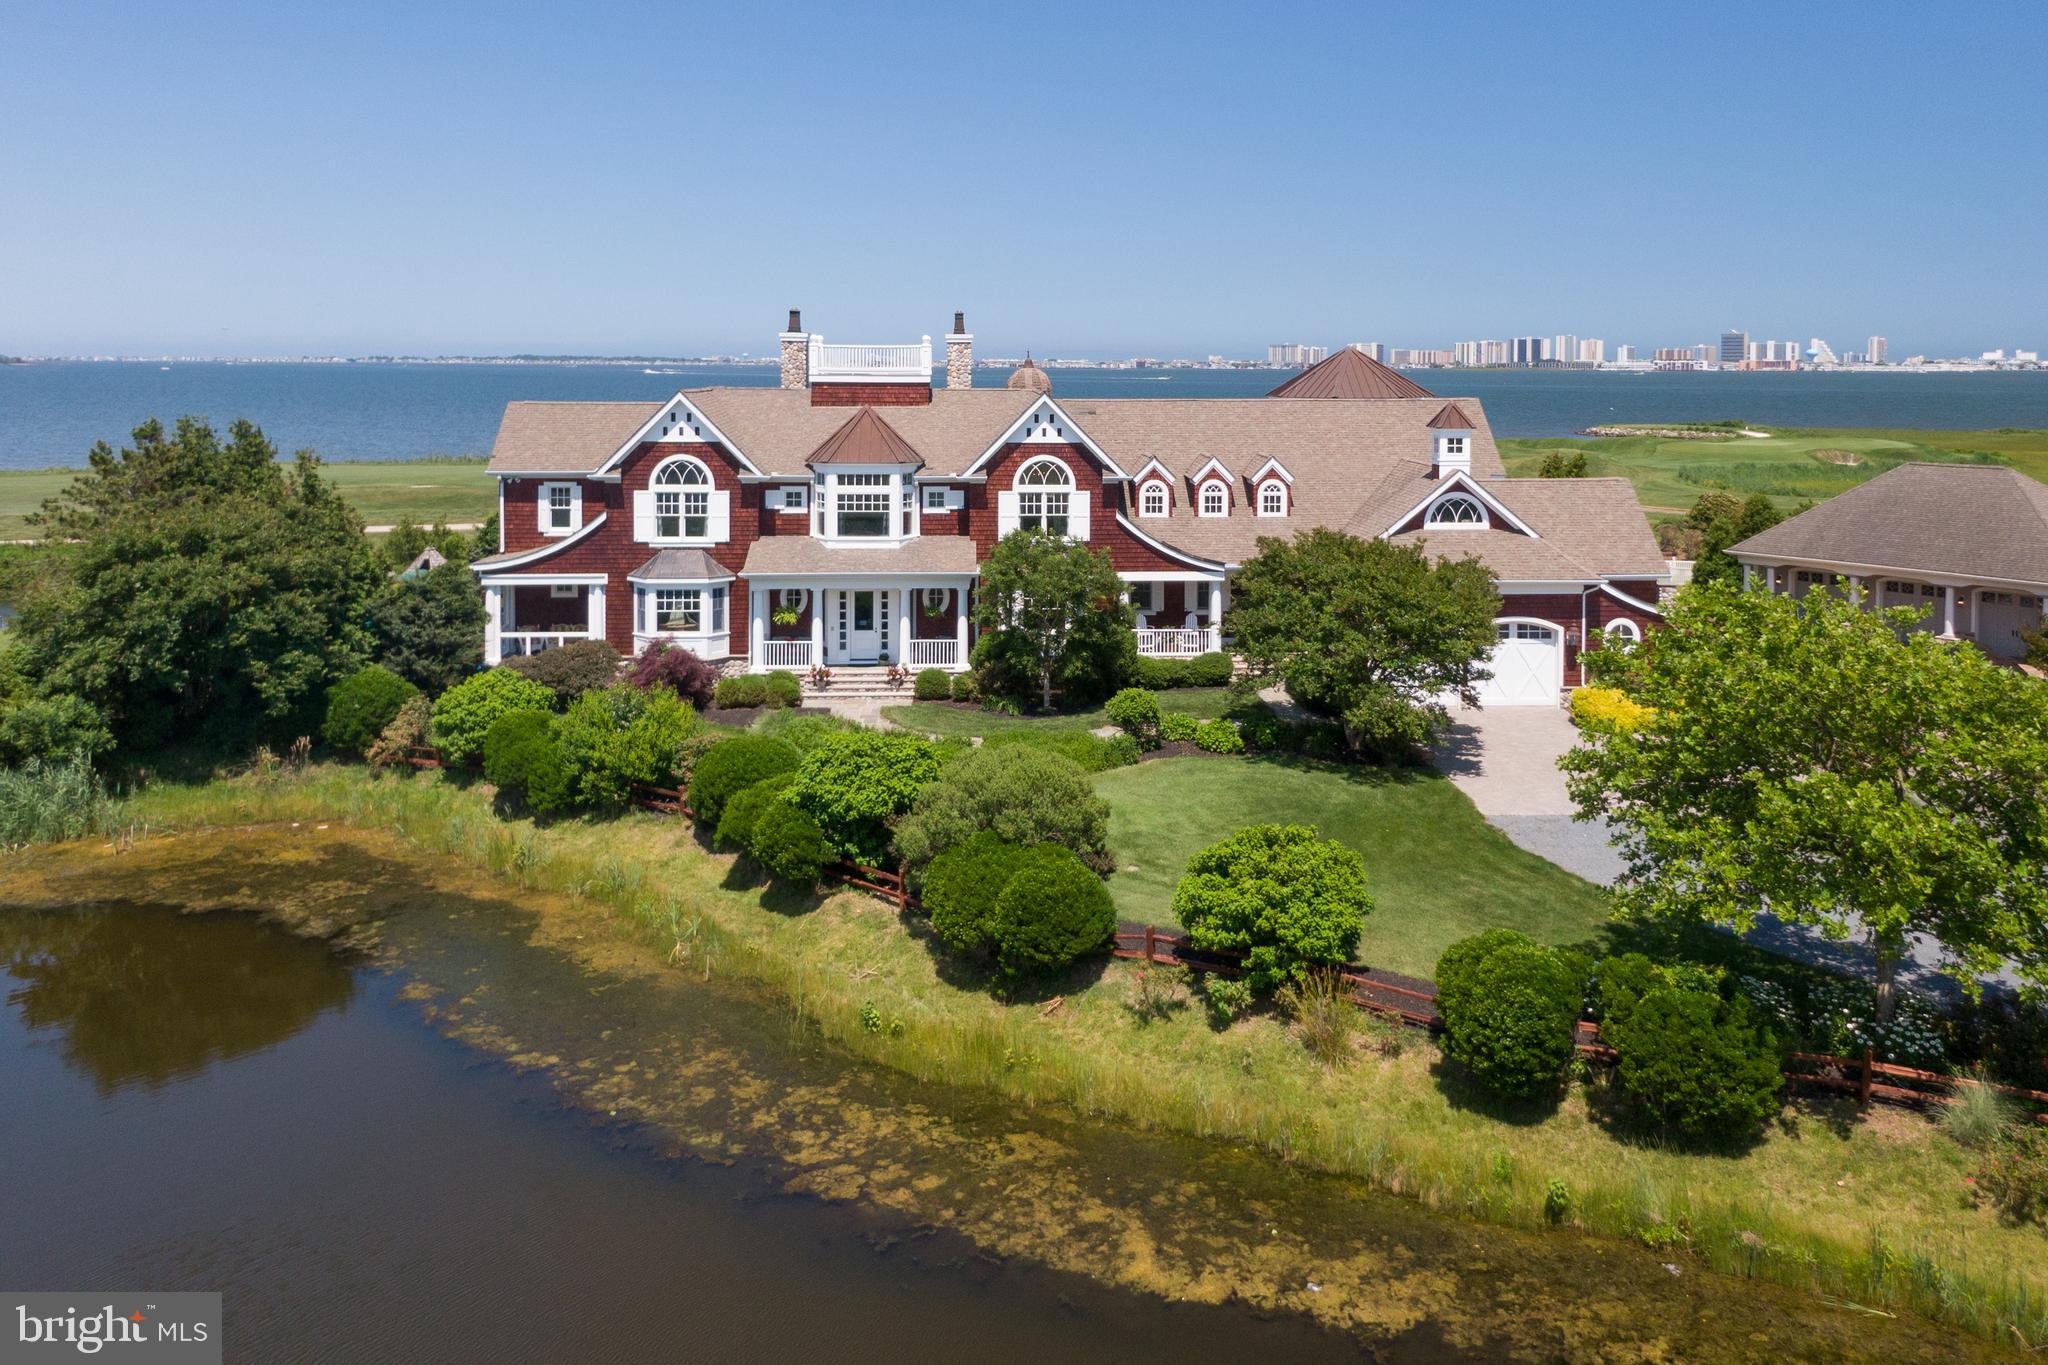 Award winning estate…this crown jewel of the Eastern Shore’s coastal corridor is situated on an acre of land overlooking indigenous habitat ponds, Links of Lighthouse Sound 4th,5th and 6th fairways and the stunning panoramic view of Assawoman Bay and the Ocean City Skyline. A collaboration of NYC and Washington DC design teams along with local artisans, this property is truly a work of art. It begins as you drive onto the stone bridge entrance, one will begin to appreciate the blend of beauty of this Hamptons-style, cedar shingled home and the Eastern Shore way of life. All rooms within the home offer stunning architectural elements and have spectacular views of Coastal natural habitats. Through the main entrance of the home, you step into an elegant foyer and beyond is the spacious living room offering a 20’ceiling, stunning picture window and commissioned aged glass mirror above the limestone fireplace. The billiard room and den features custom Honduran Mahogany woodwork throughout, full bar area with granite countertops and side porch. To the right of the foyer is an elegant dining room featuring Gracie hand-painted wallpaper depicting paintings of our local Audubon setting. The bay window allows for breathtaking sunsets during evening dining. The chef’s kitchen with Carrara Italian marble, Wolfe appliances and custom tile includes a breakfast room and cozy sitting area. As an extension of the kitchen, the Butler’s pantry features granite countertops, a 120-bottle wine refrigerator, copper sink and separate beverage refrigerator. The 3-story octagonal turret overlooks the 40x16 gated pool and hot tub with hardscape. On the second floor, the primary bedroom offers a gas fireplace, reading area, private balcony, striking ensuite with separate 17’x22’ dressing room. The yoga/flex room has 5 magnificent 5’ circular windows which takes full advantage of the peaceful bay and golf course views. The top-level observatory serves as a perfect home office adding the morning sunrise and Ocean City skyline. Other notable features include walnut floors throughout the home, front and back staircases, pocket doors allowing additional privacy, solid 8’ wood doors, designer silk window treatments, 2 laundry rooms, hand-crafted custom woodwork, 9’ vaulted or extended ceilings, surround sound, 2.5 garage with 220V EV charging station, 4 heating A/C systems, 2 80-gallon hot H2O, rooftop widows watch with spectacular 360-degree, panoramic views. The property also provides easy access to the bay through neighborhood beach and protected cove for small boat anchorage and a 30' floating boat slip at Pines Point Marina.